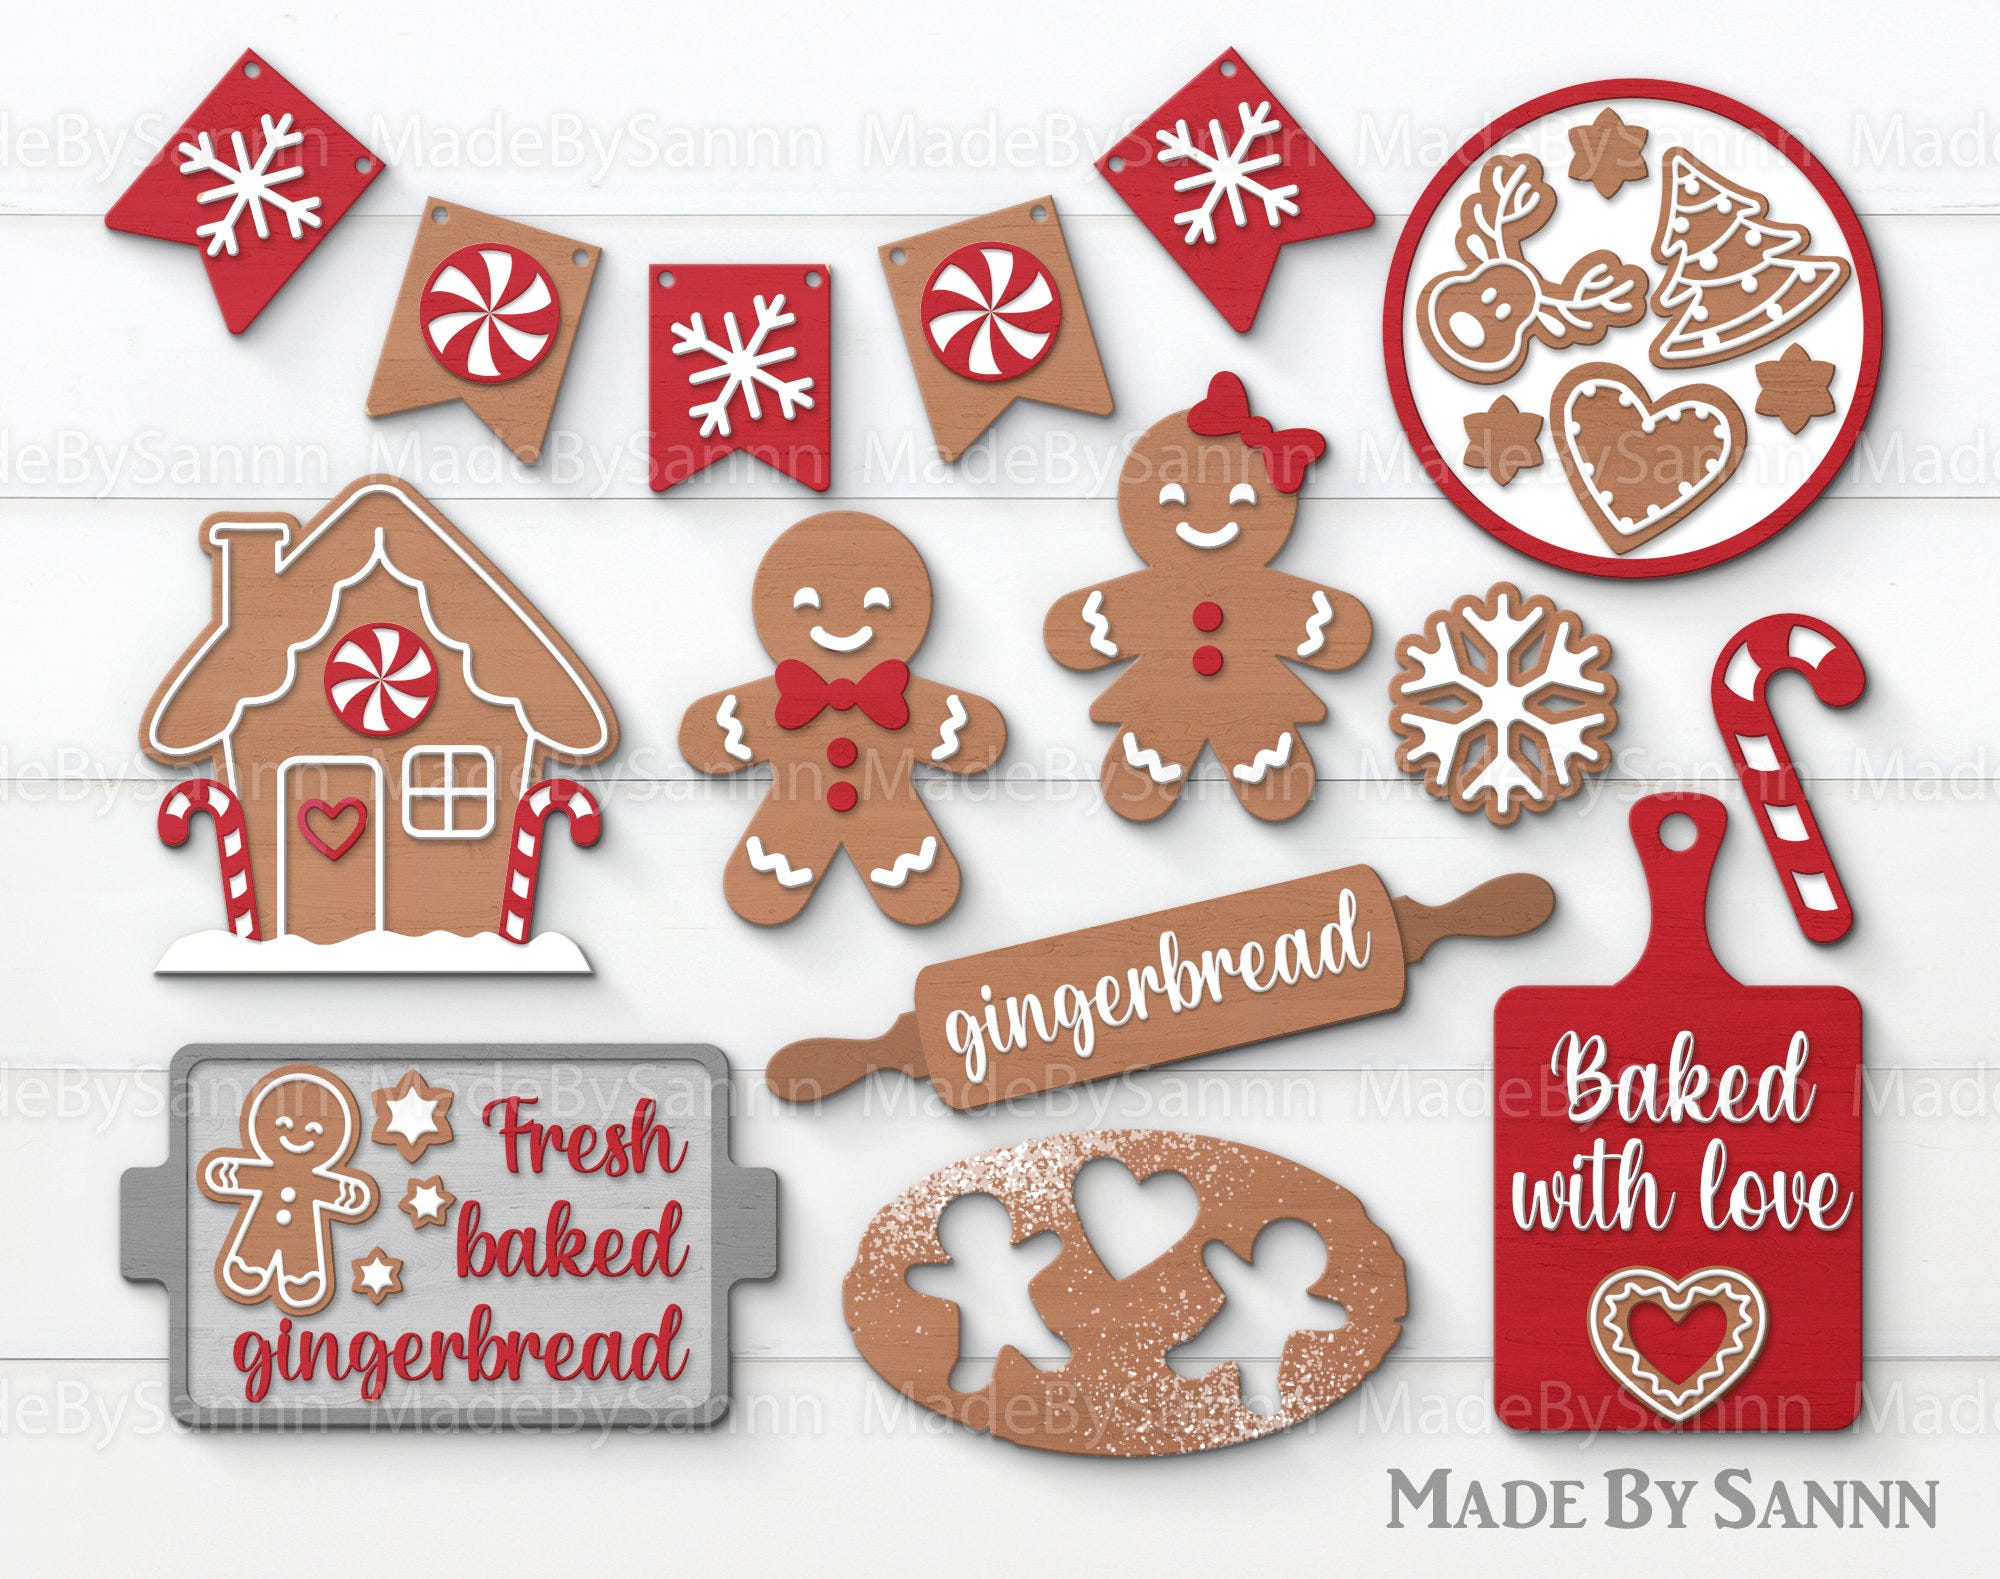 Christmas Tiered Tray Svg Bundle, Gingerbread Cookie Laser Svg, Glowforge Svg, Christmas Decor Svg, Tiered Tray decor, Winter Tiered Tray